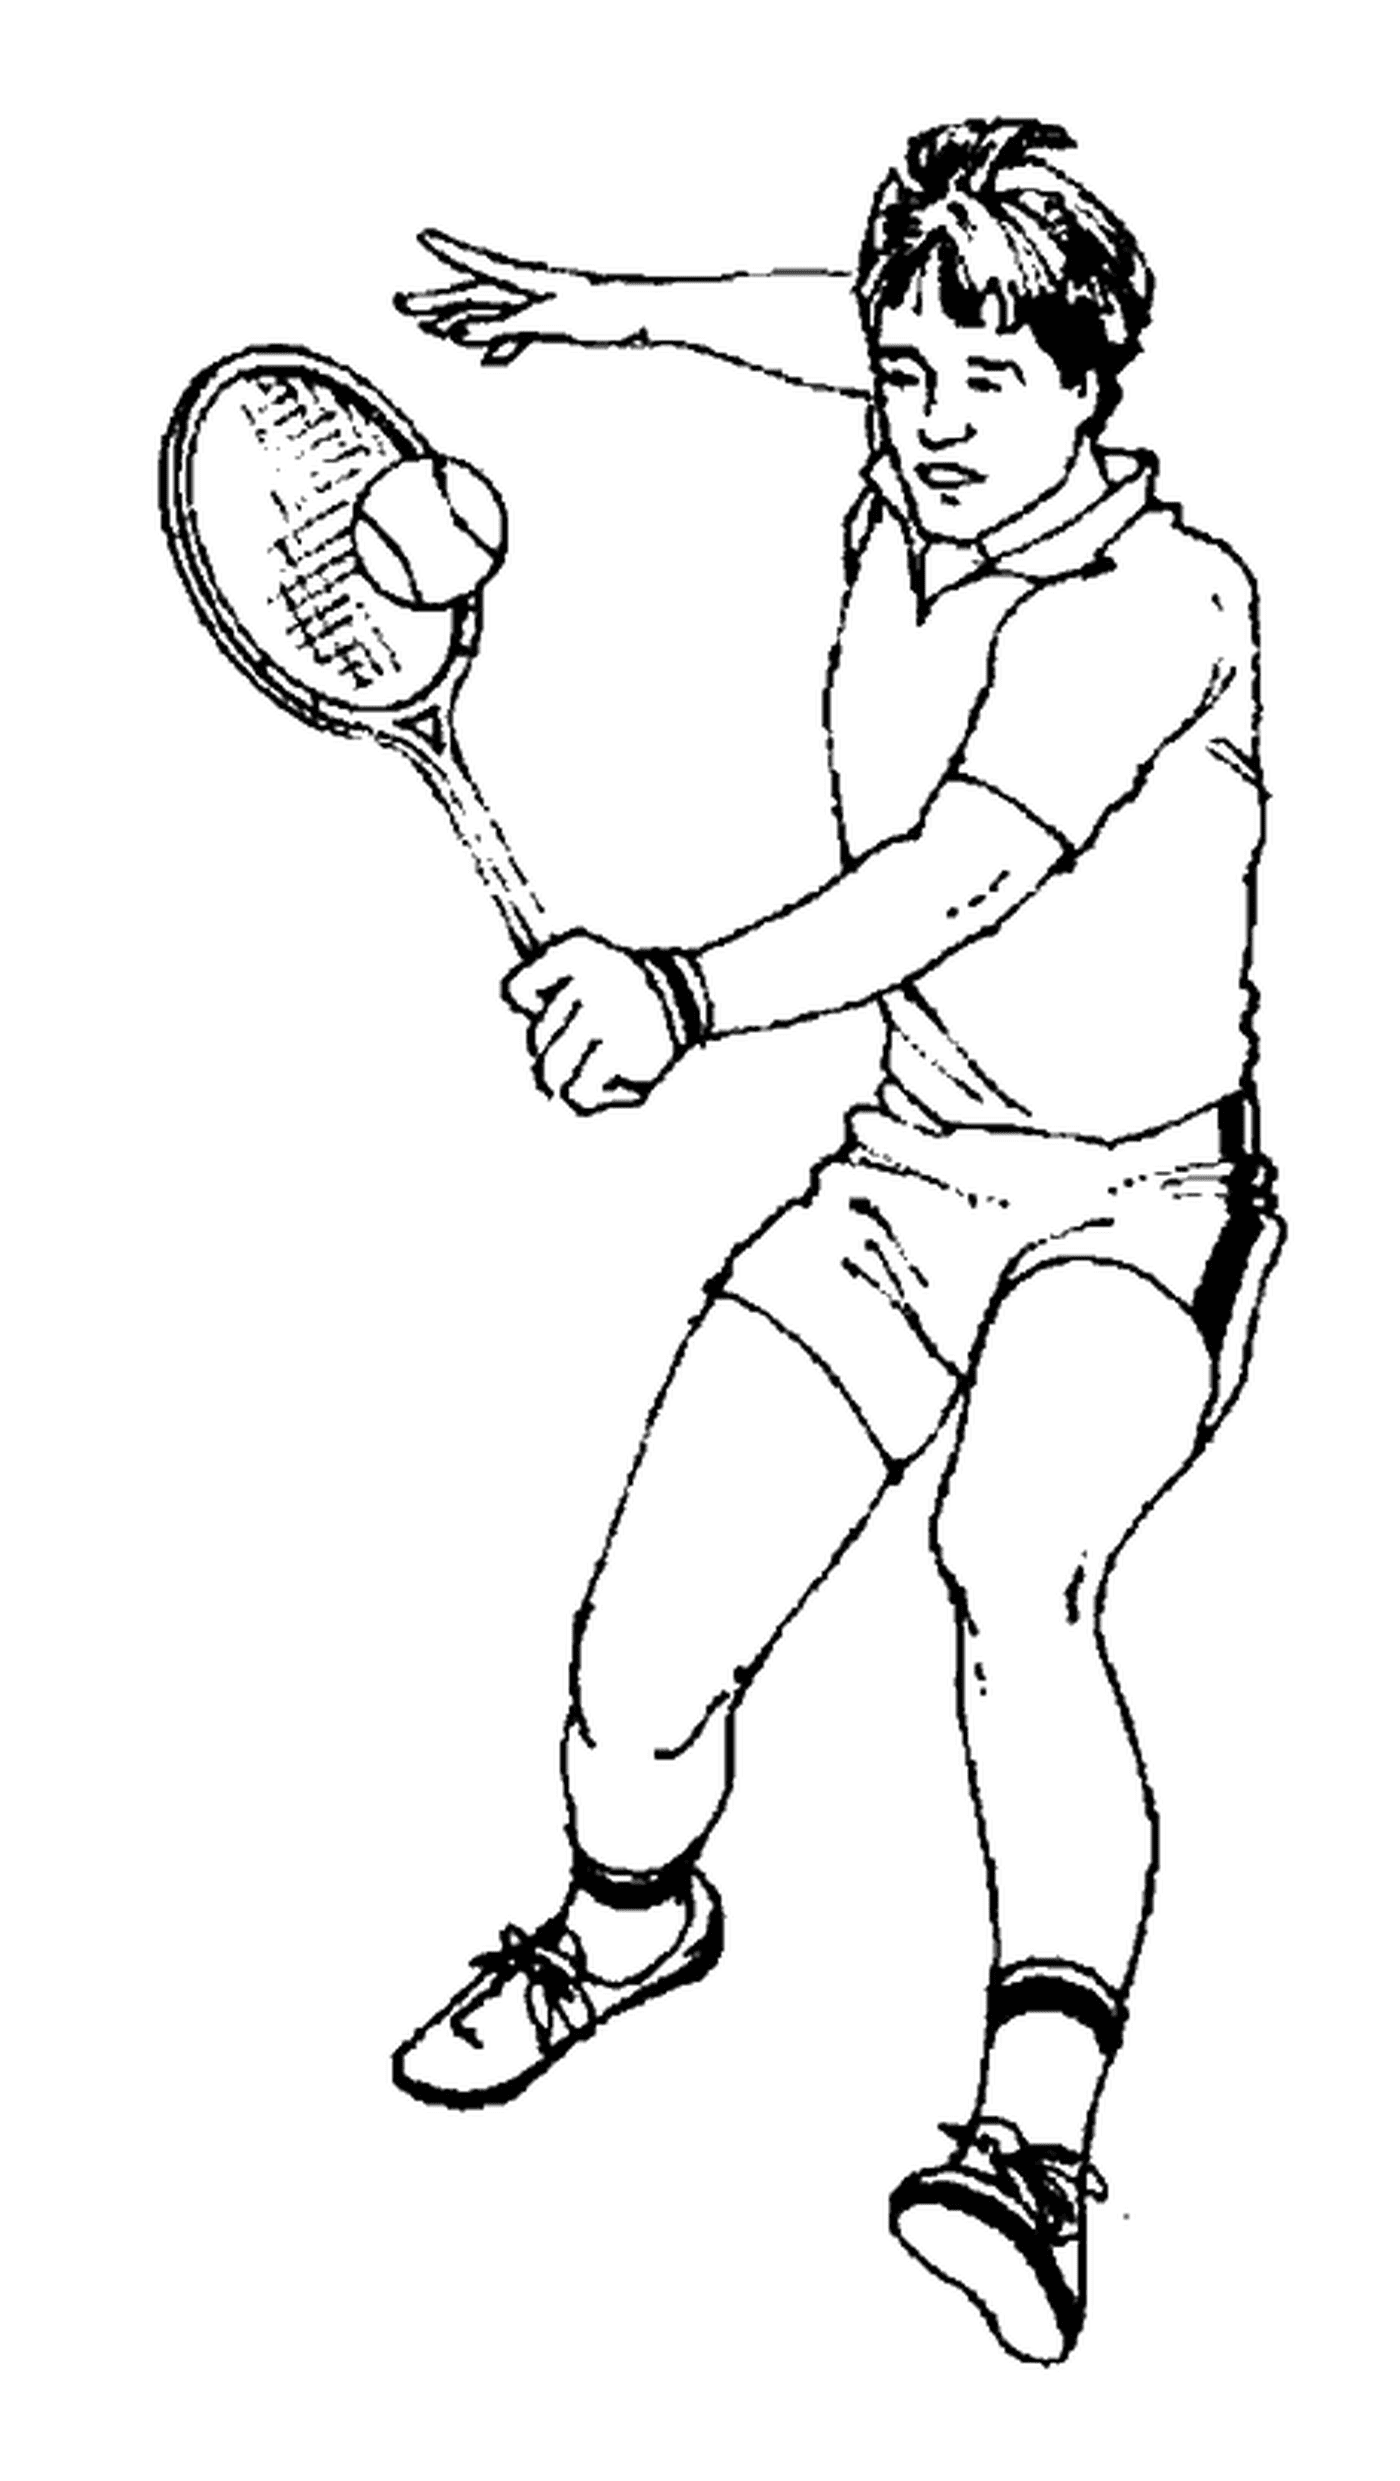  He sends the ball back with his racket 